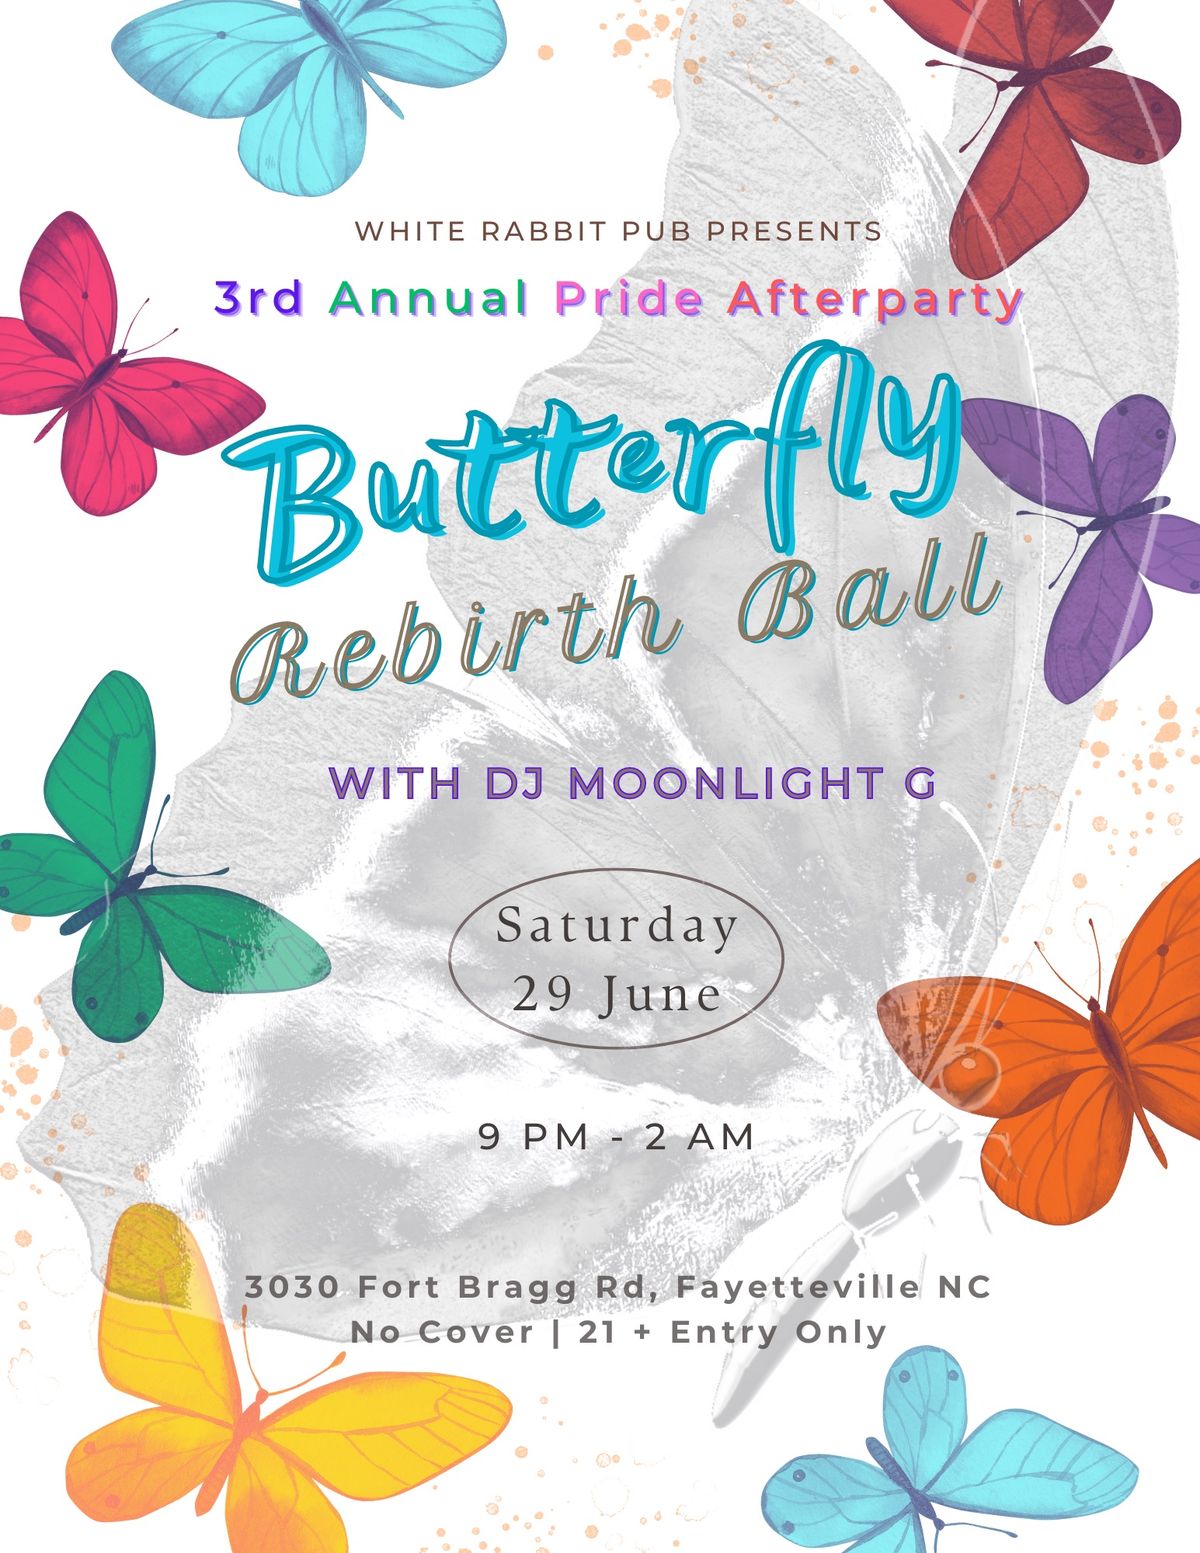 Fayetteville Pride Afterparty: Butterfly Rebirth Ball